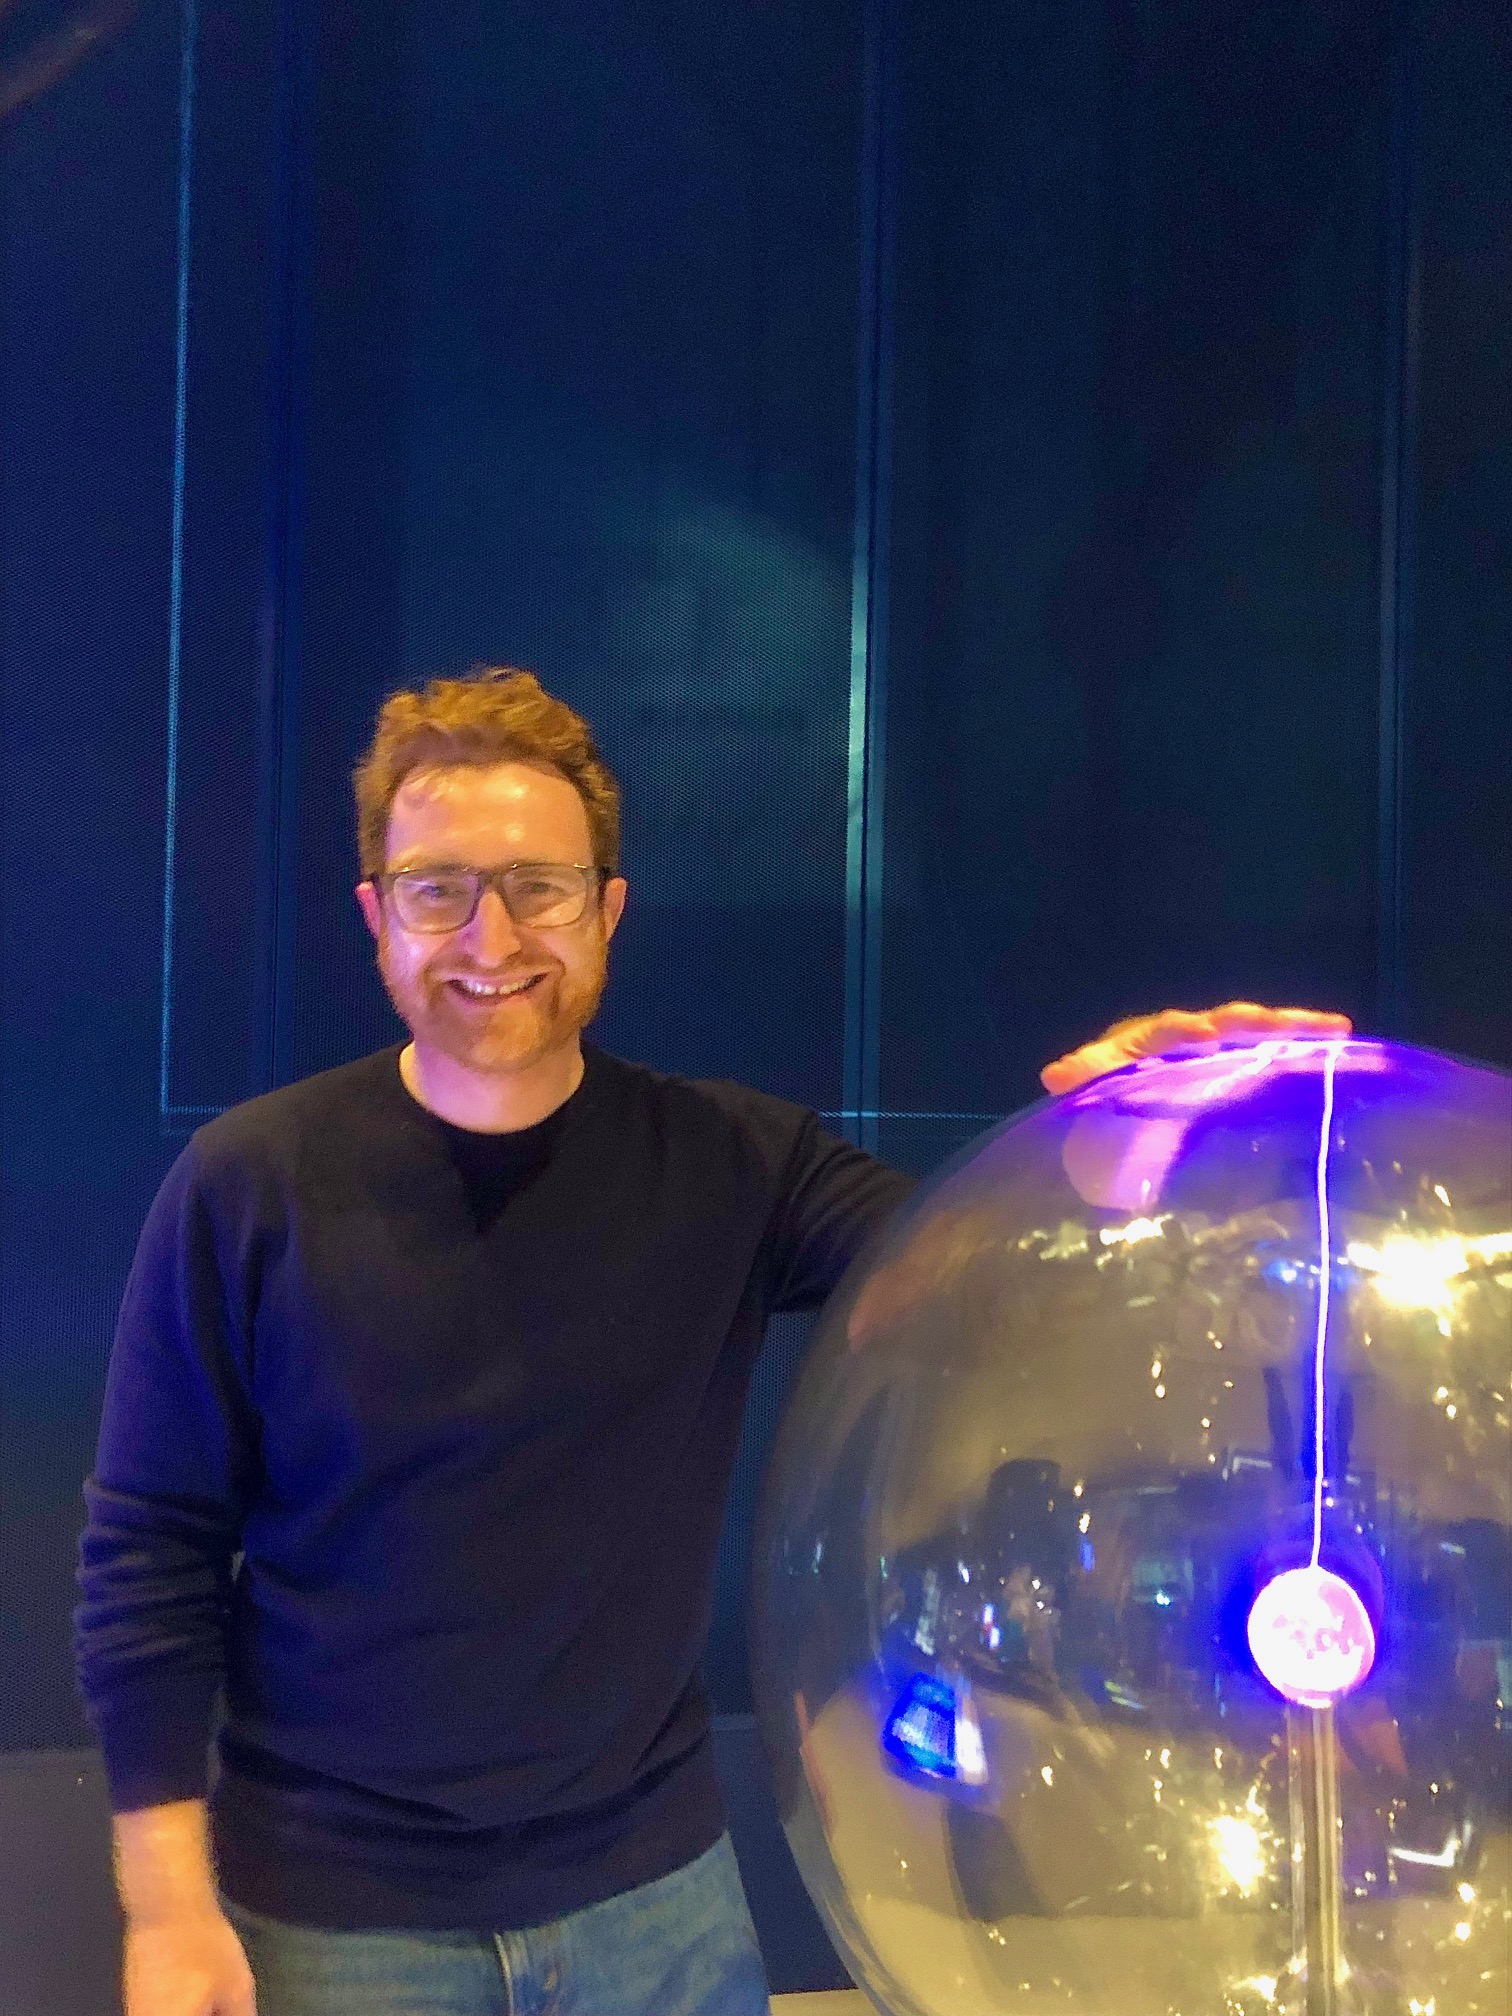 Nick is a white male with medium length red hair and a matching red beard and full rimmed eye glasses. He is wearing a blue sweater and jeans. He is at the Museum of Science and Industry standing next to a glass plasma ball with his left hand on the glass ball.